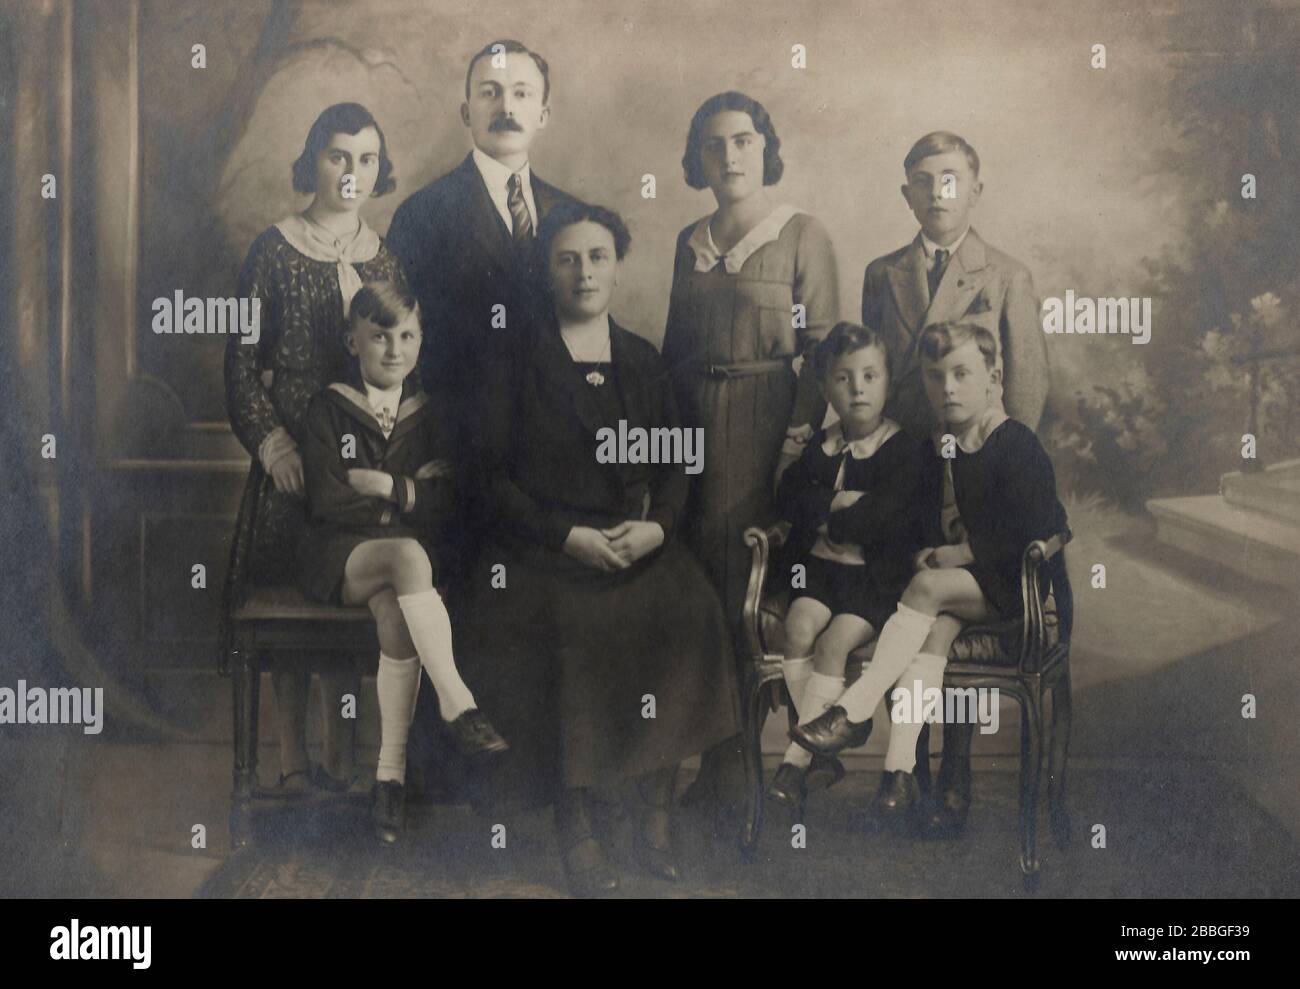 Very stylish studio family photograph from around 1920, showing a possibly bourgeoisie class family with 6 children in Antwerp, Belgium Stock Photo